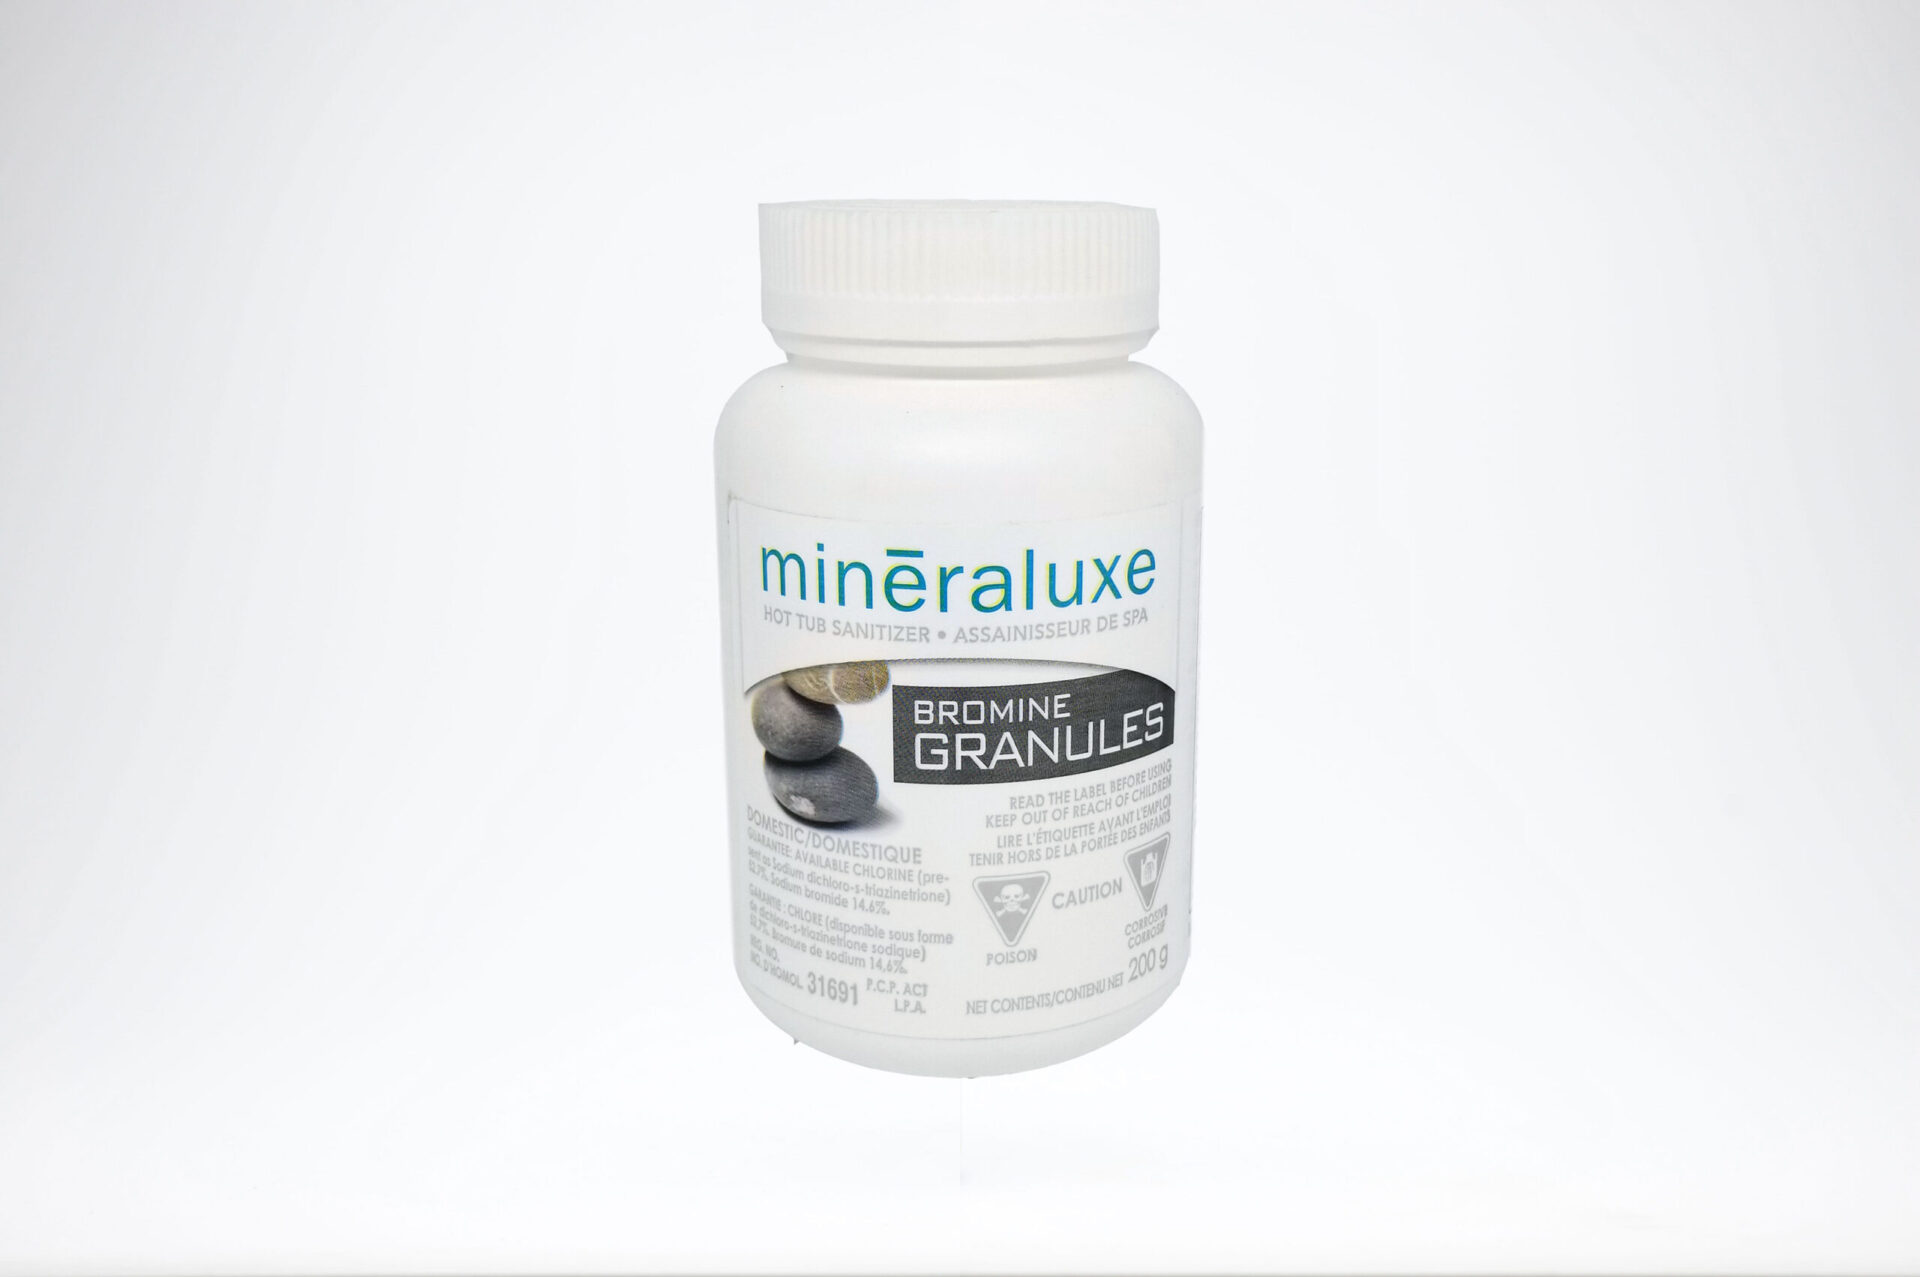 Mineraluxe Bromine Granules 200g 1 scaled - Mineraluxe Bromine Granules 200g